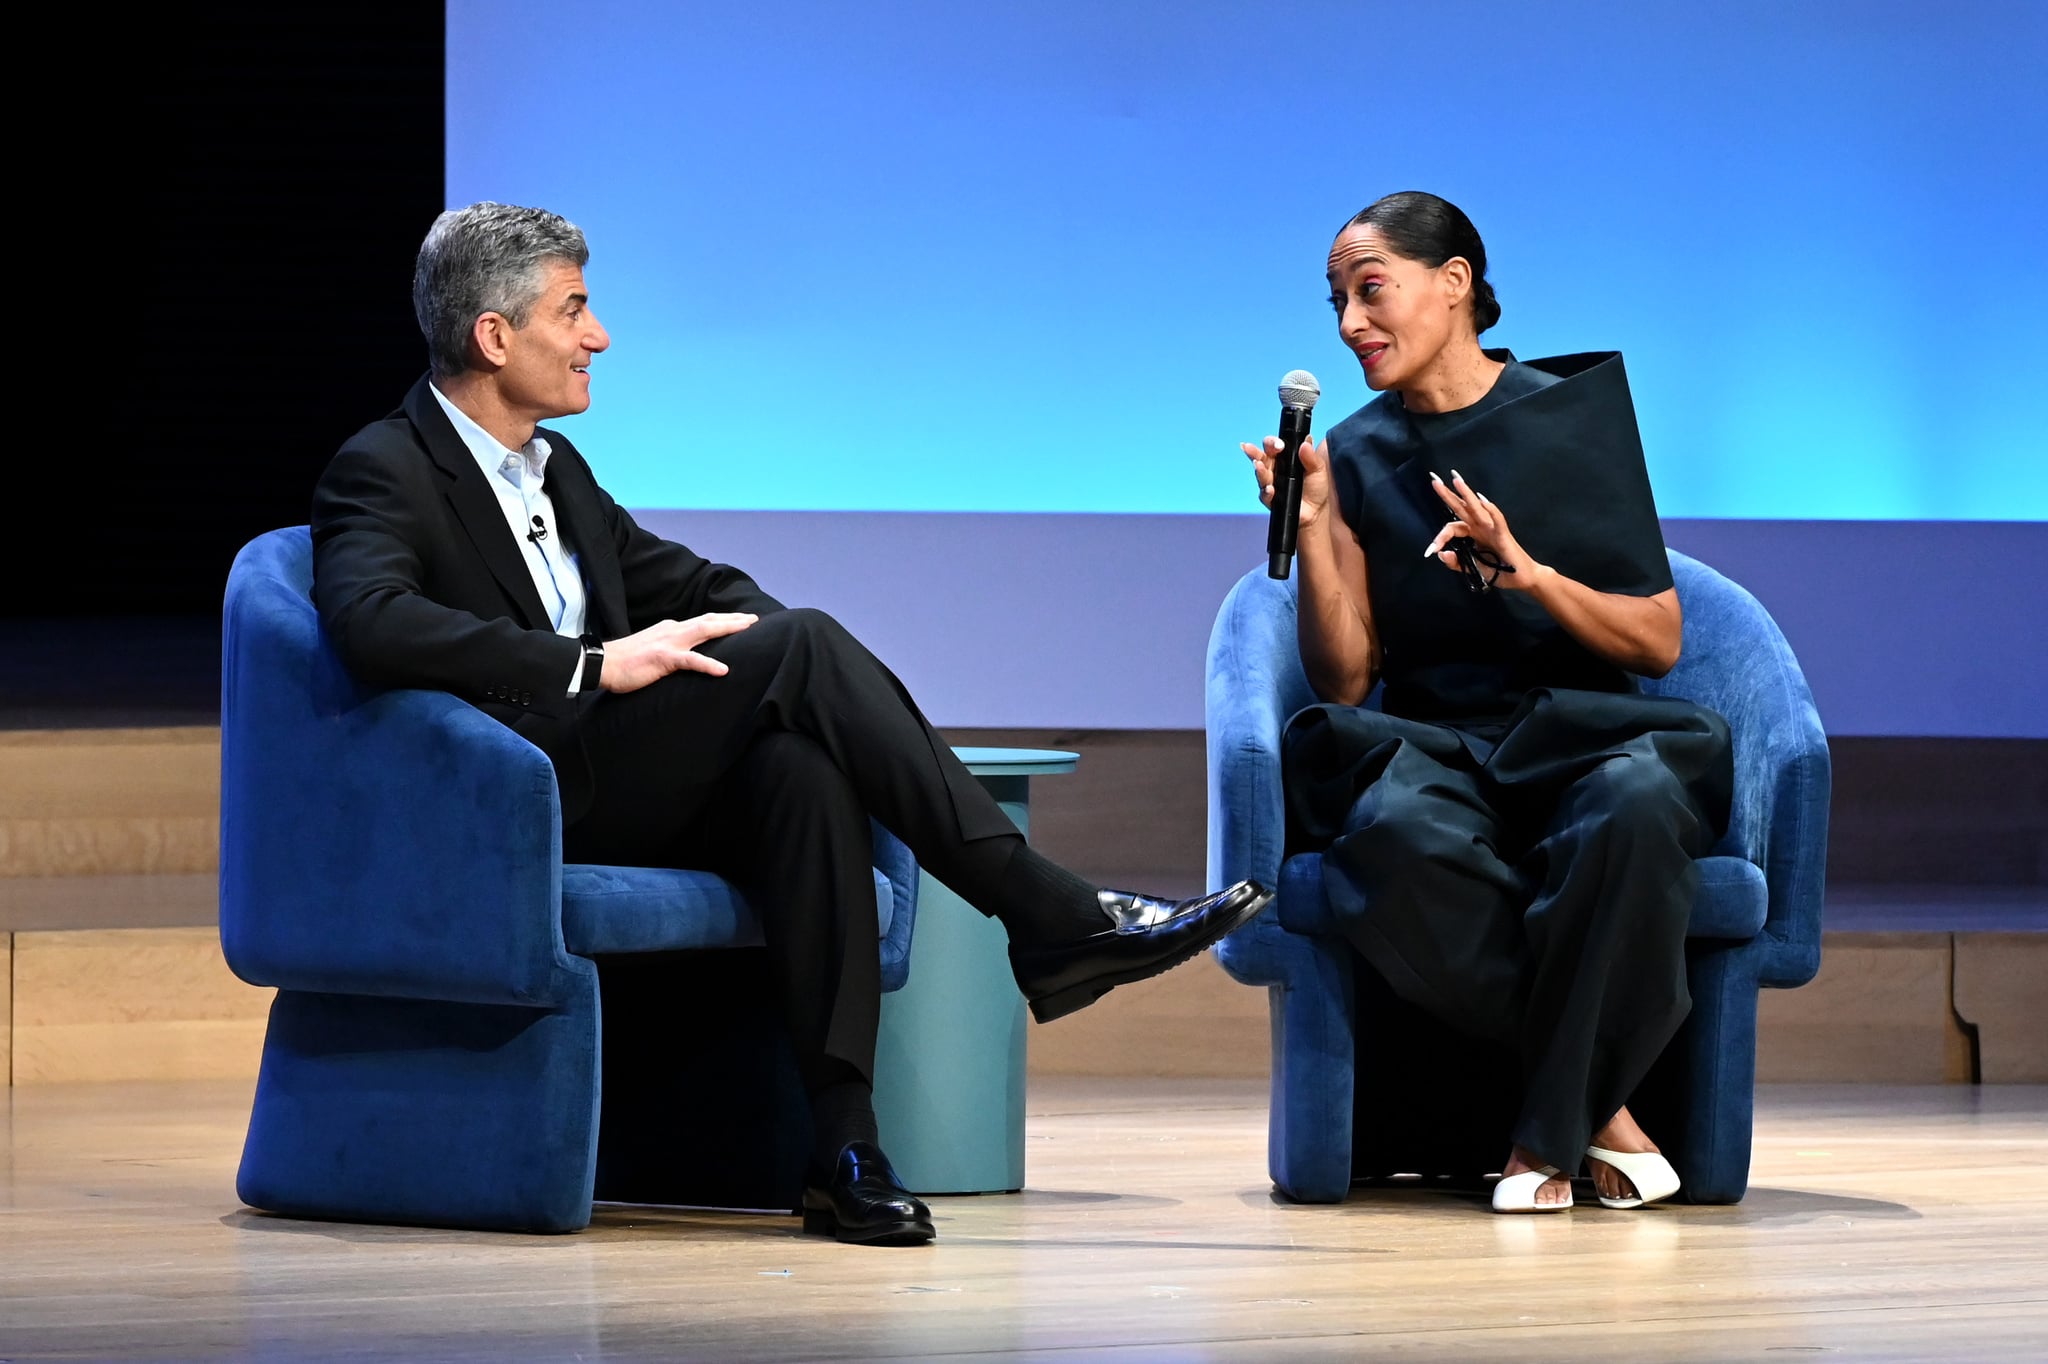 NEW YORK, NEW YORK - MAY 01: Alan Moss and Tracee Ellis Ross speaks onstage at Amazon NewFronts 2023 at David Geffen Hall on May 01, 2023 in New York City. (Photo by Slaven Vlasic/Getty Images for Amazon)